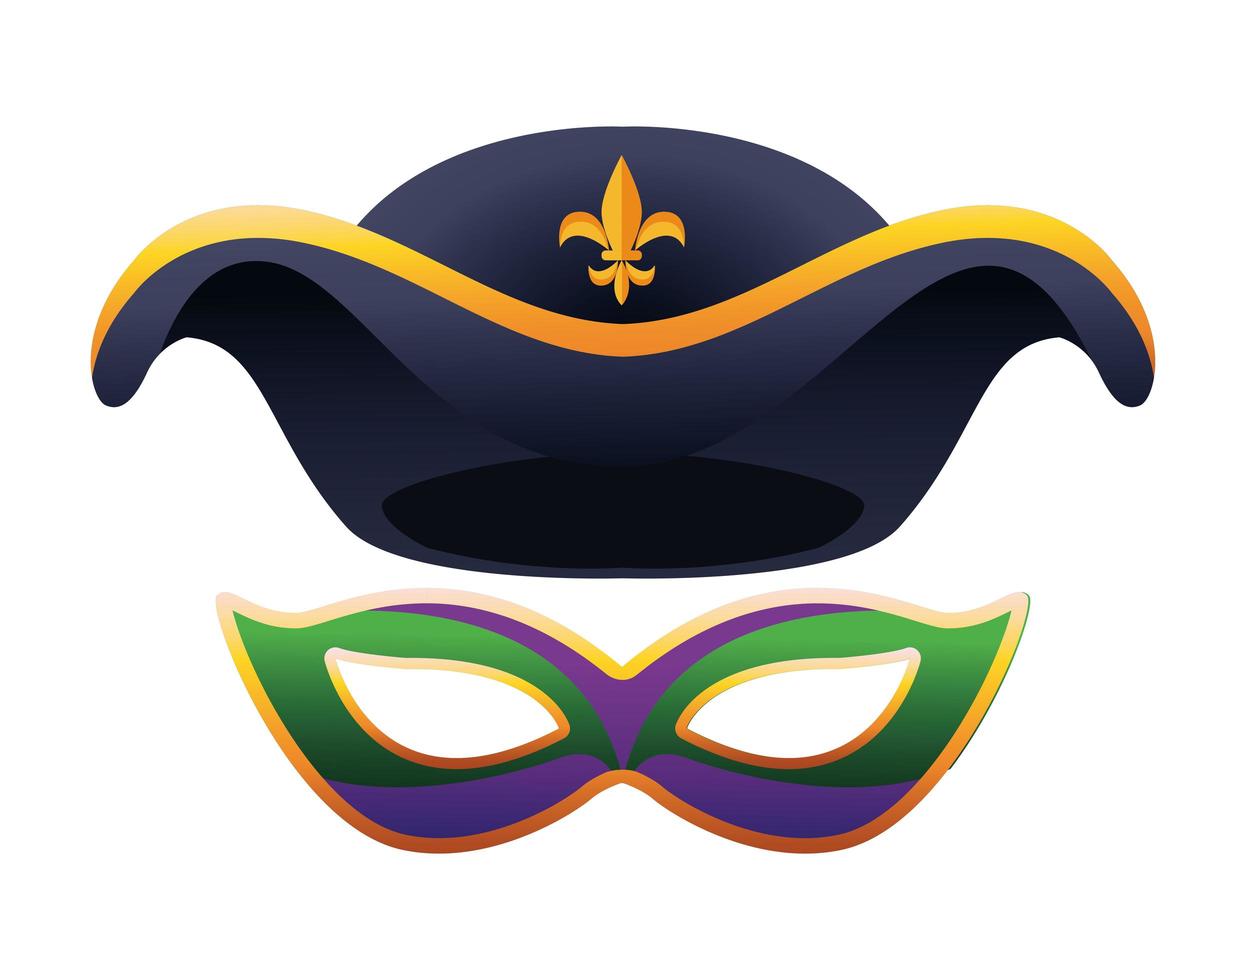 pirate hat and mardi gras mask icon vector